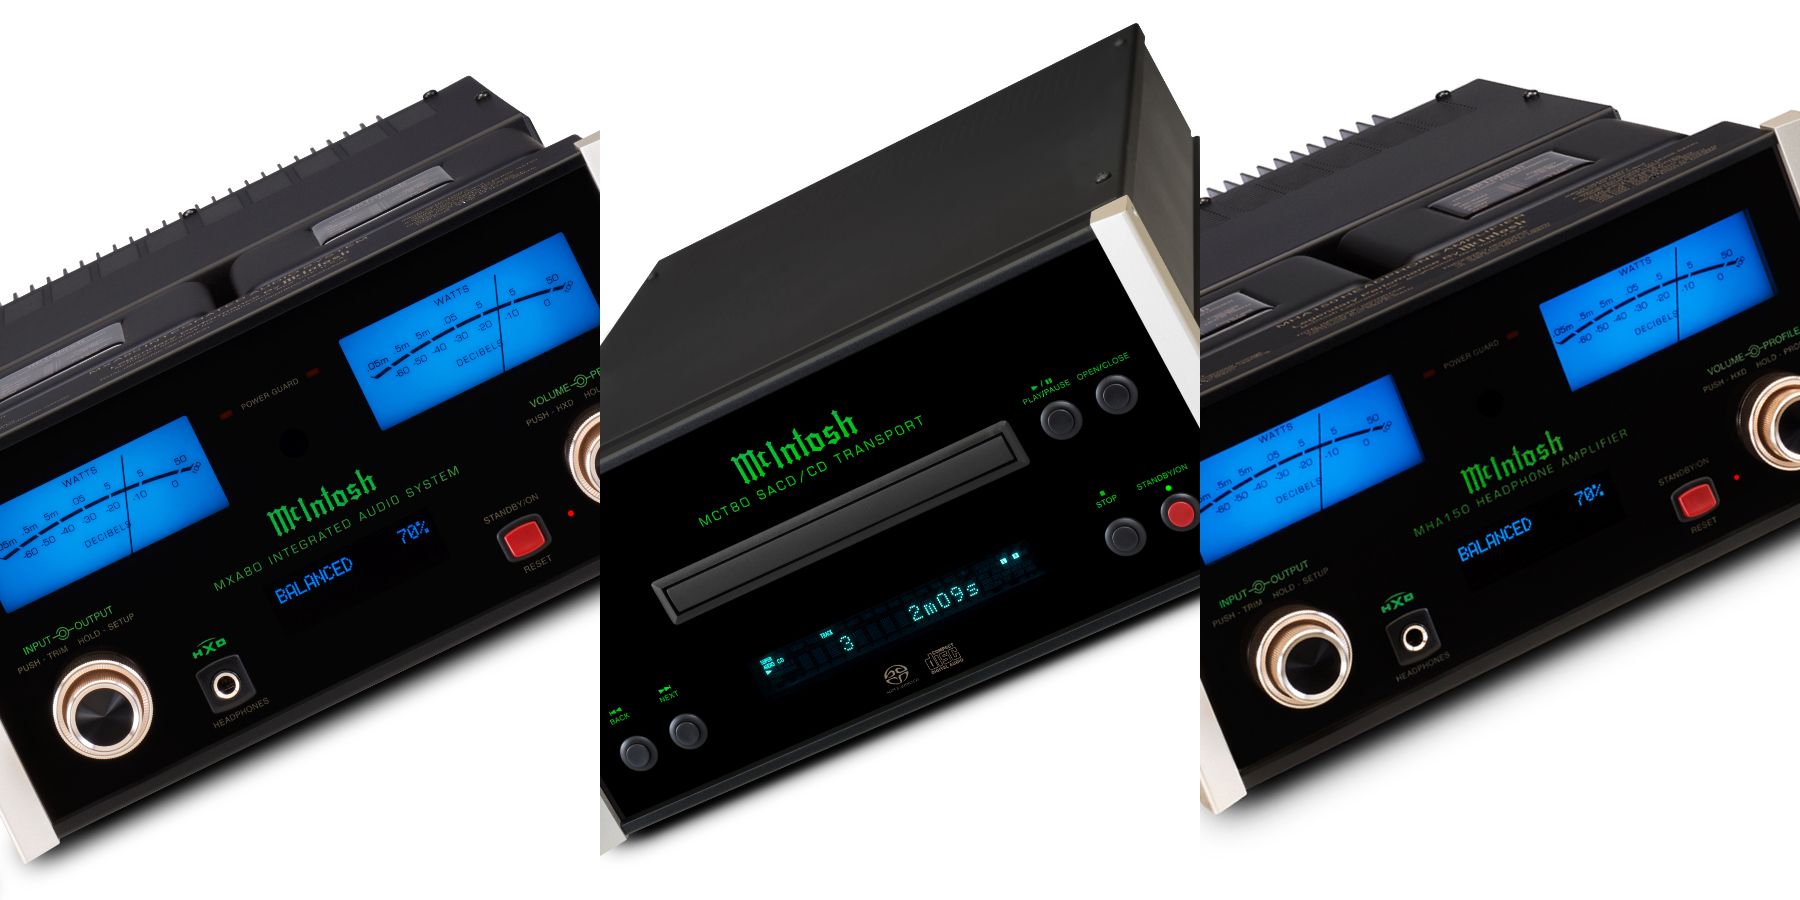 The McIntosh MXA80, MHA150, and MCT80 are all now discontinued﻿